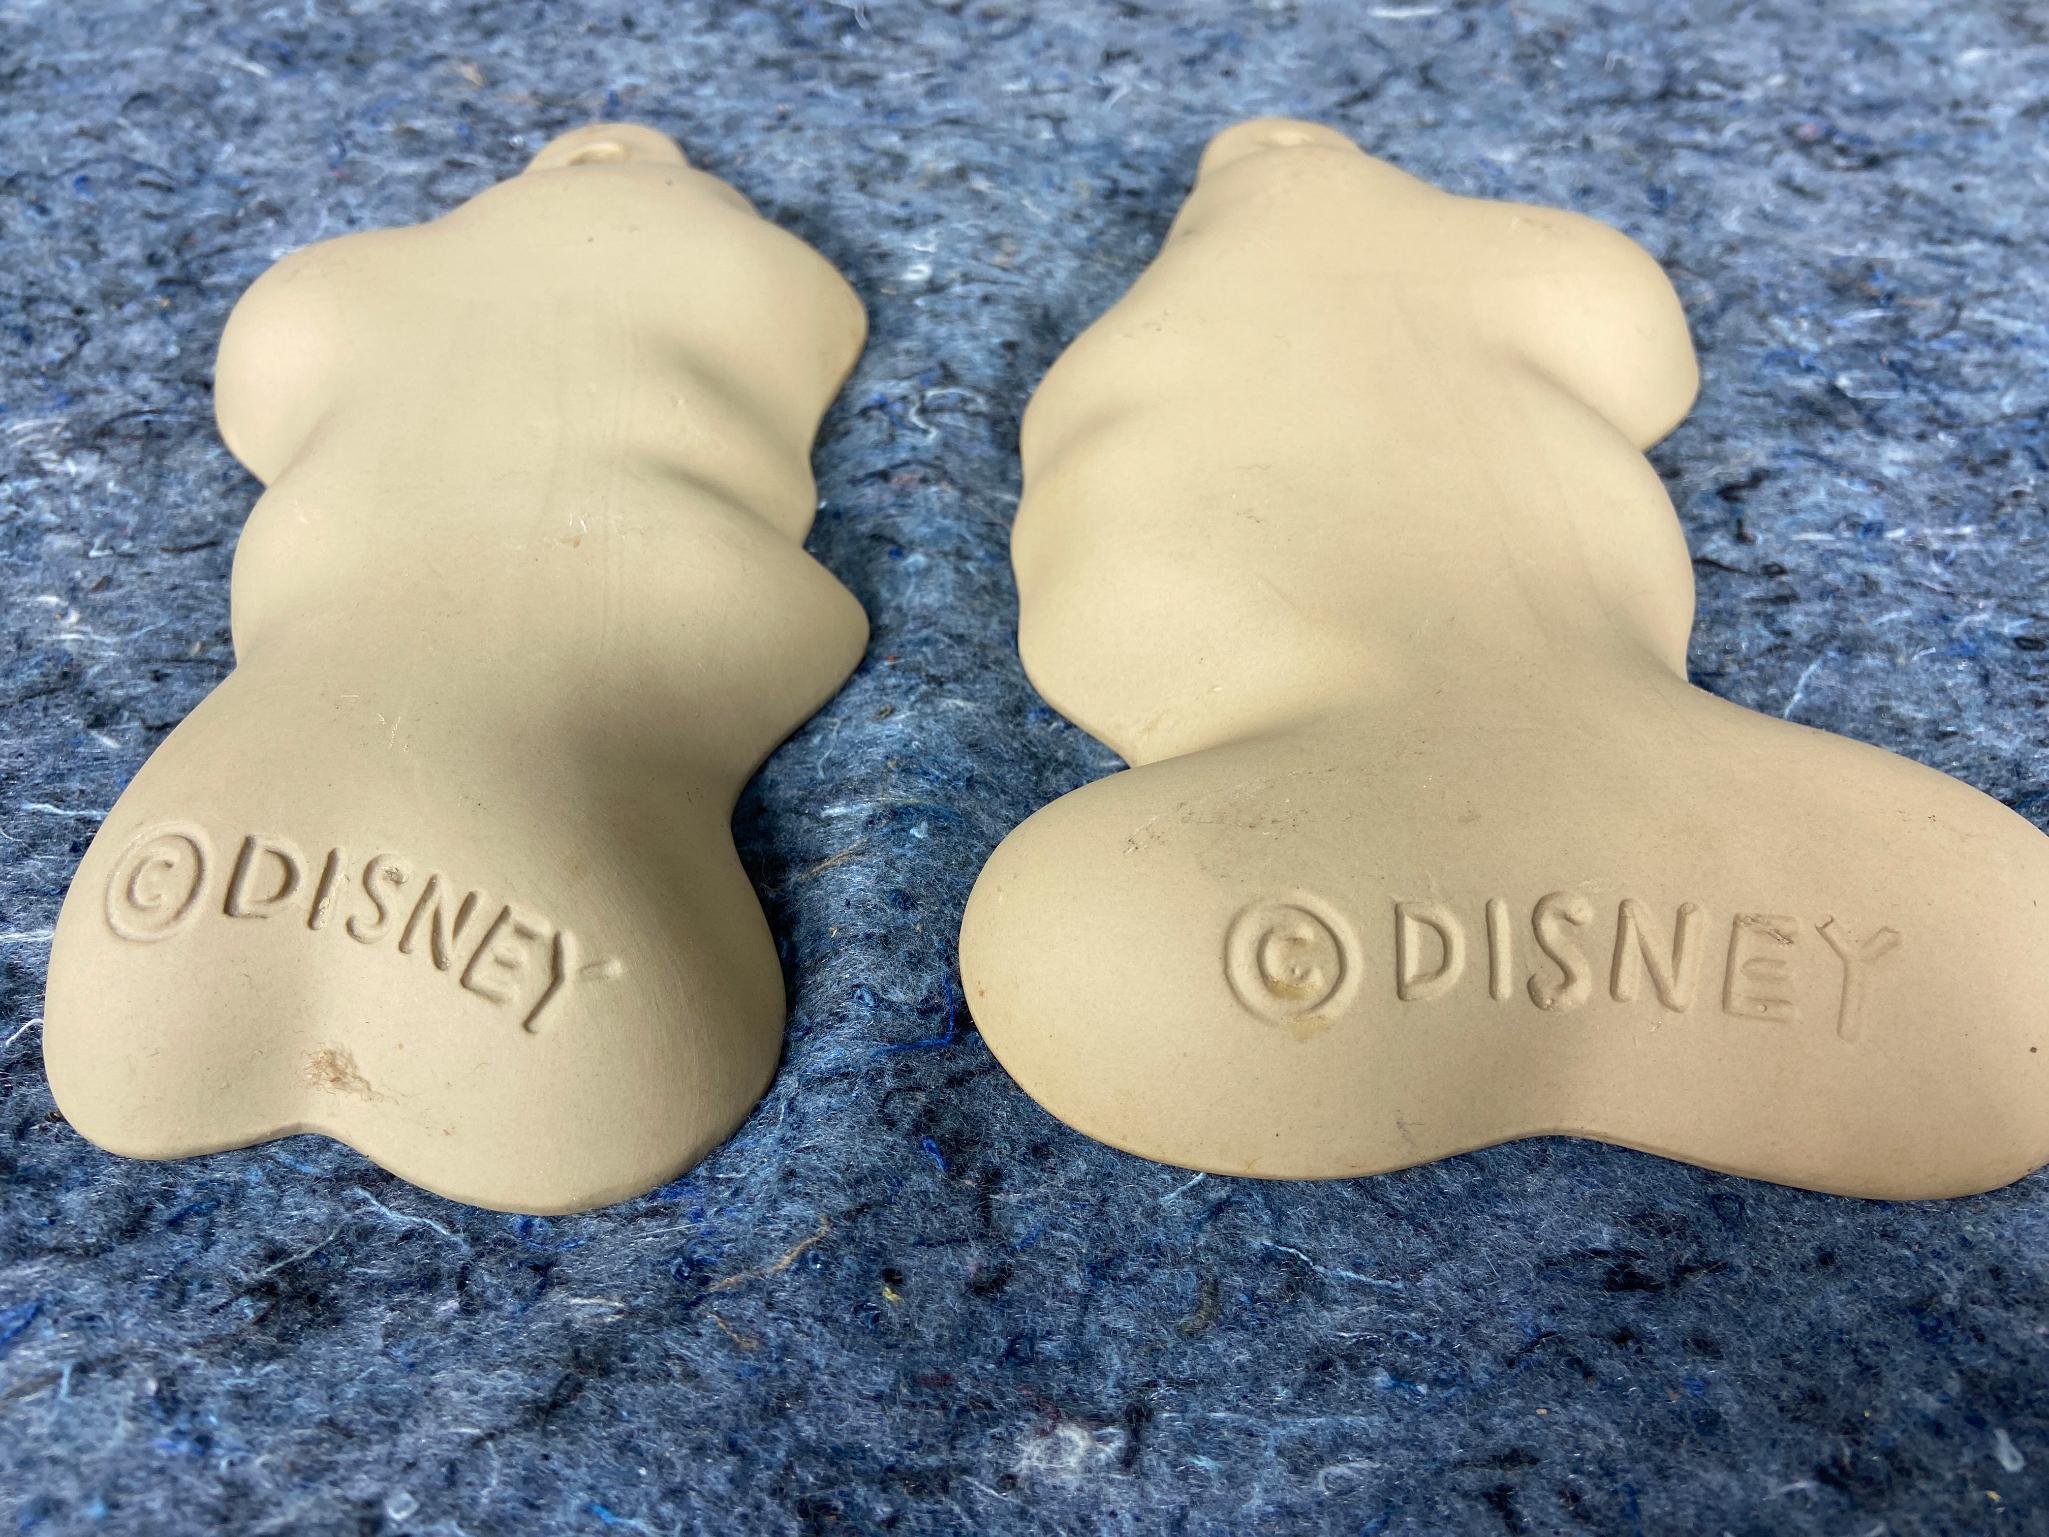 7 Vintage Cookie Molds including Mickey Mouse, Minnie Mouse, Donald Duck, Ohio State, and More